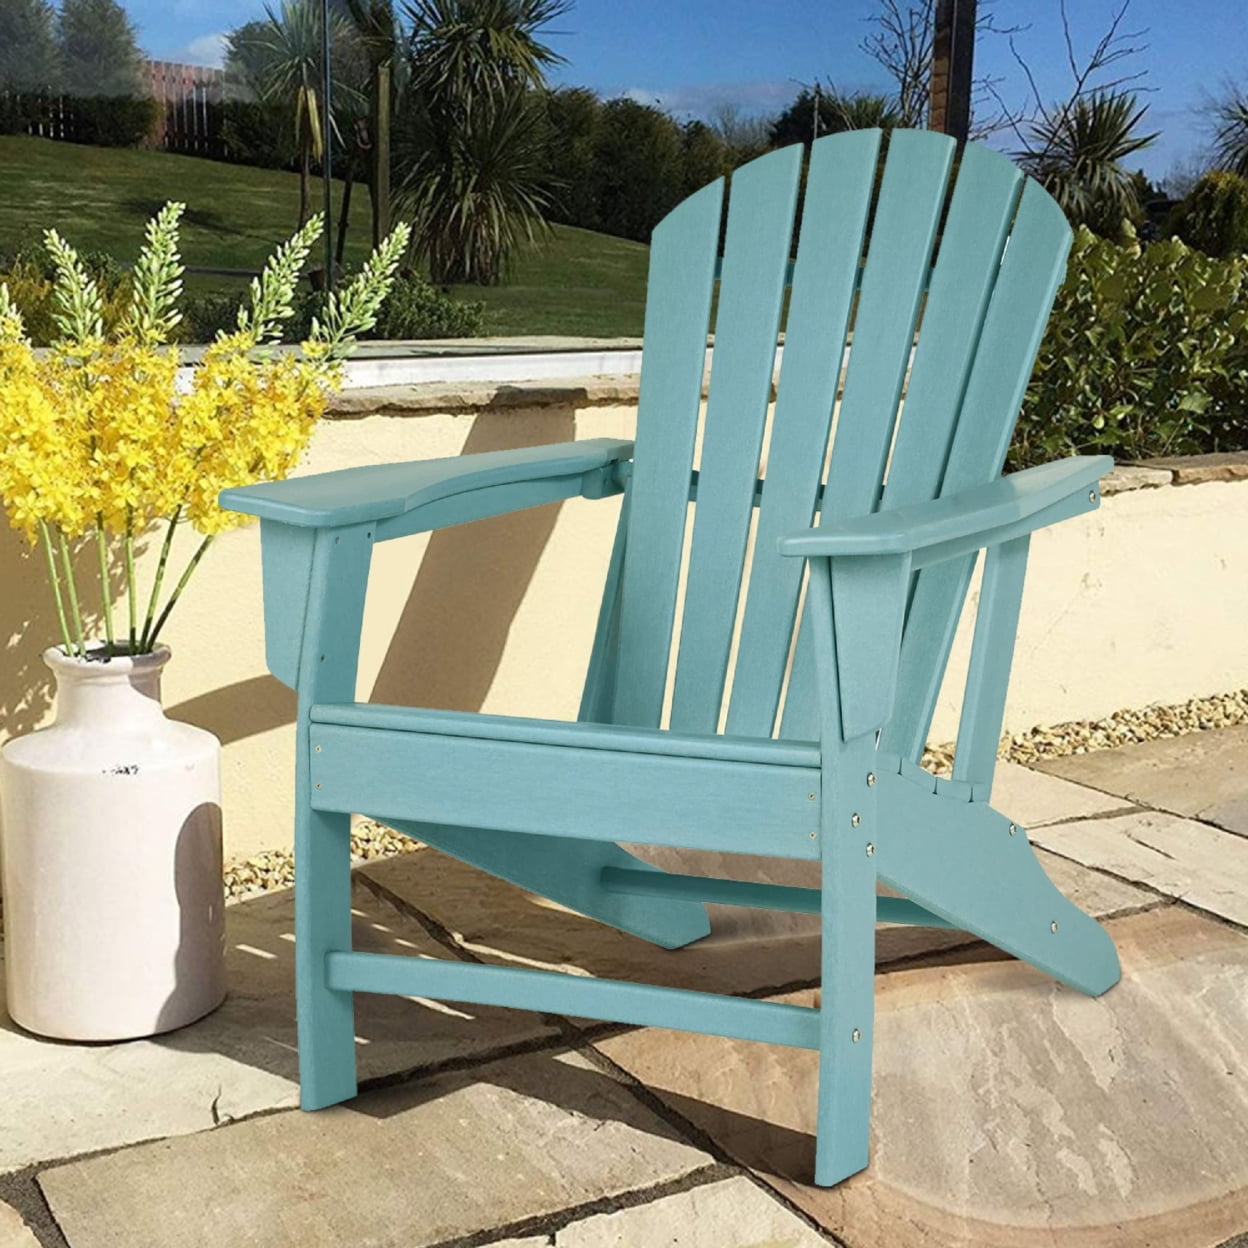 Picture of Benjara BM209701 37.75 x 31.25 x 33.25 in. Contemporary Plastic Adirondack Chair with Slatted Back, Turquoise